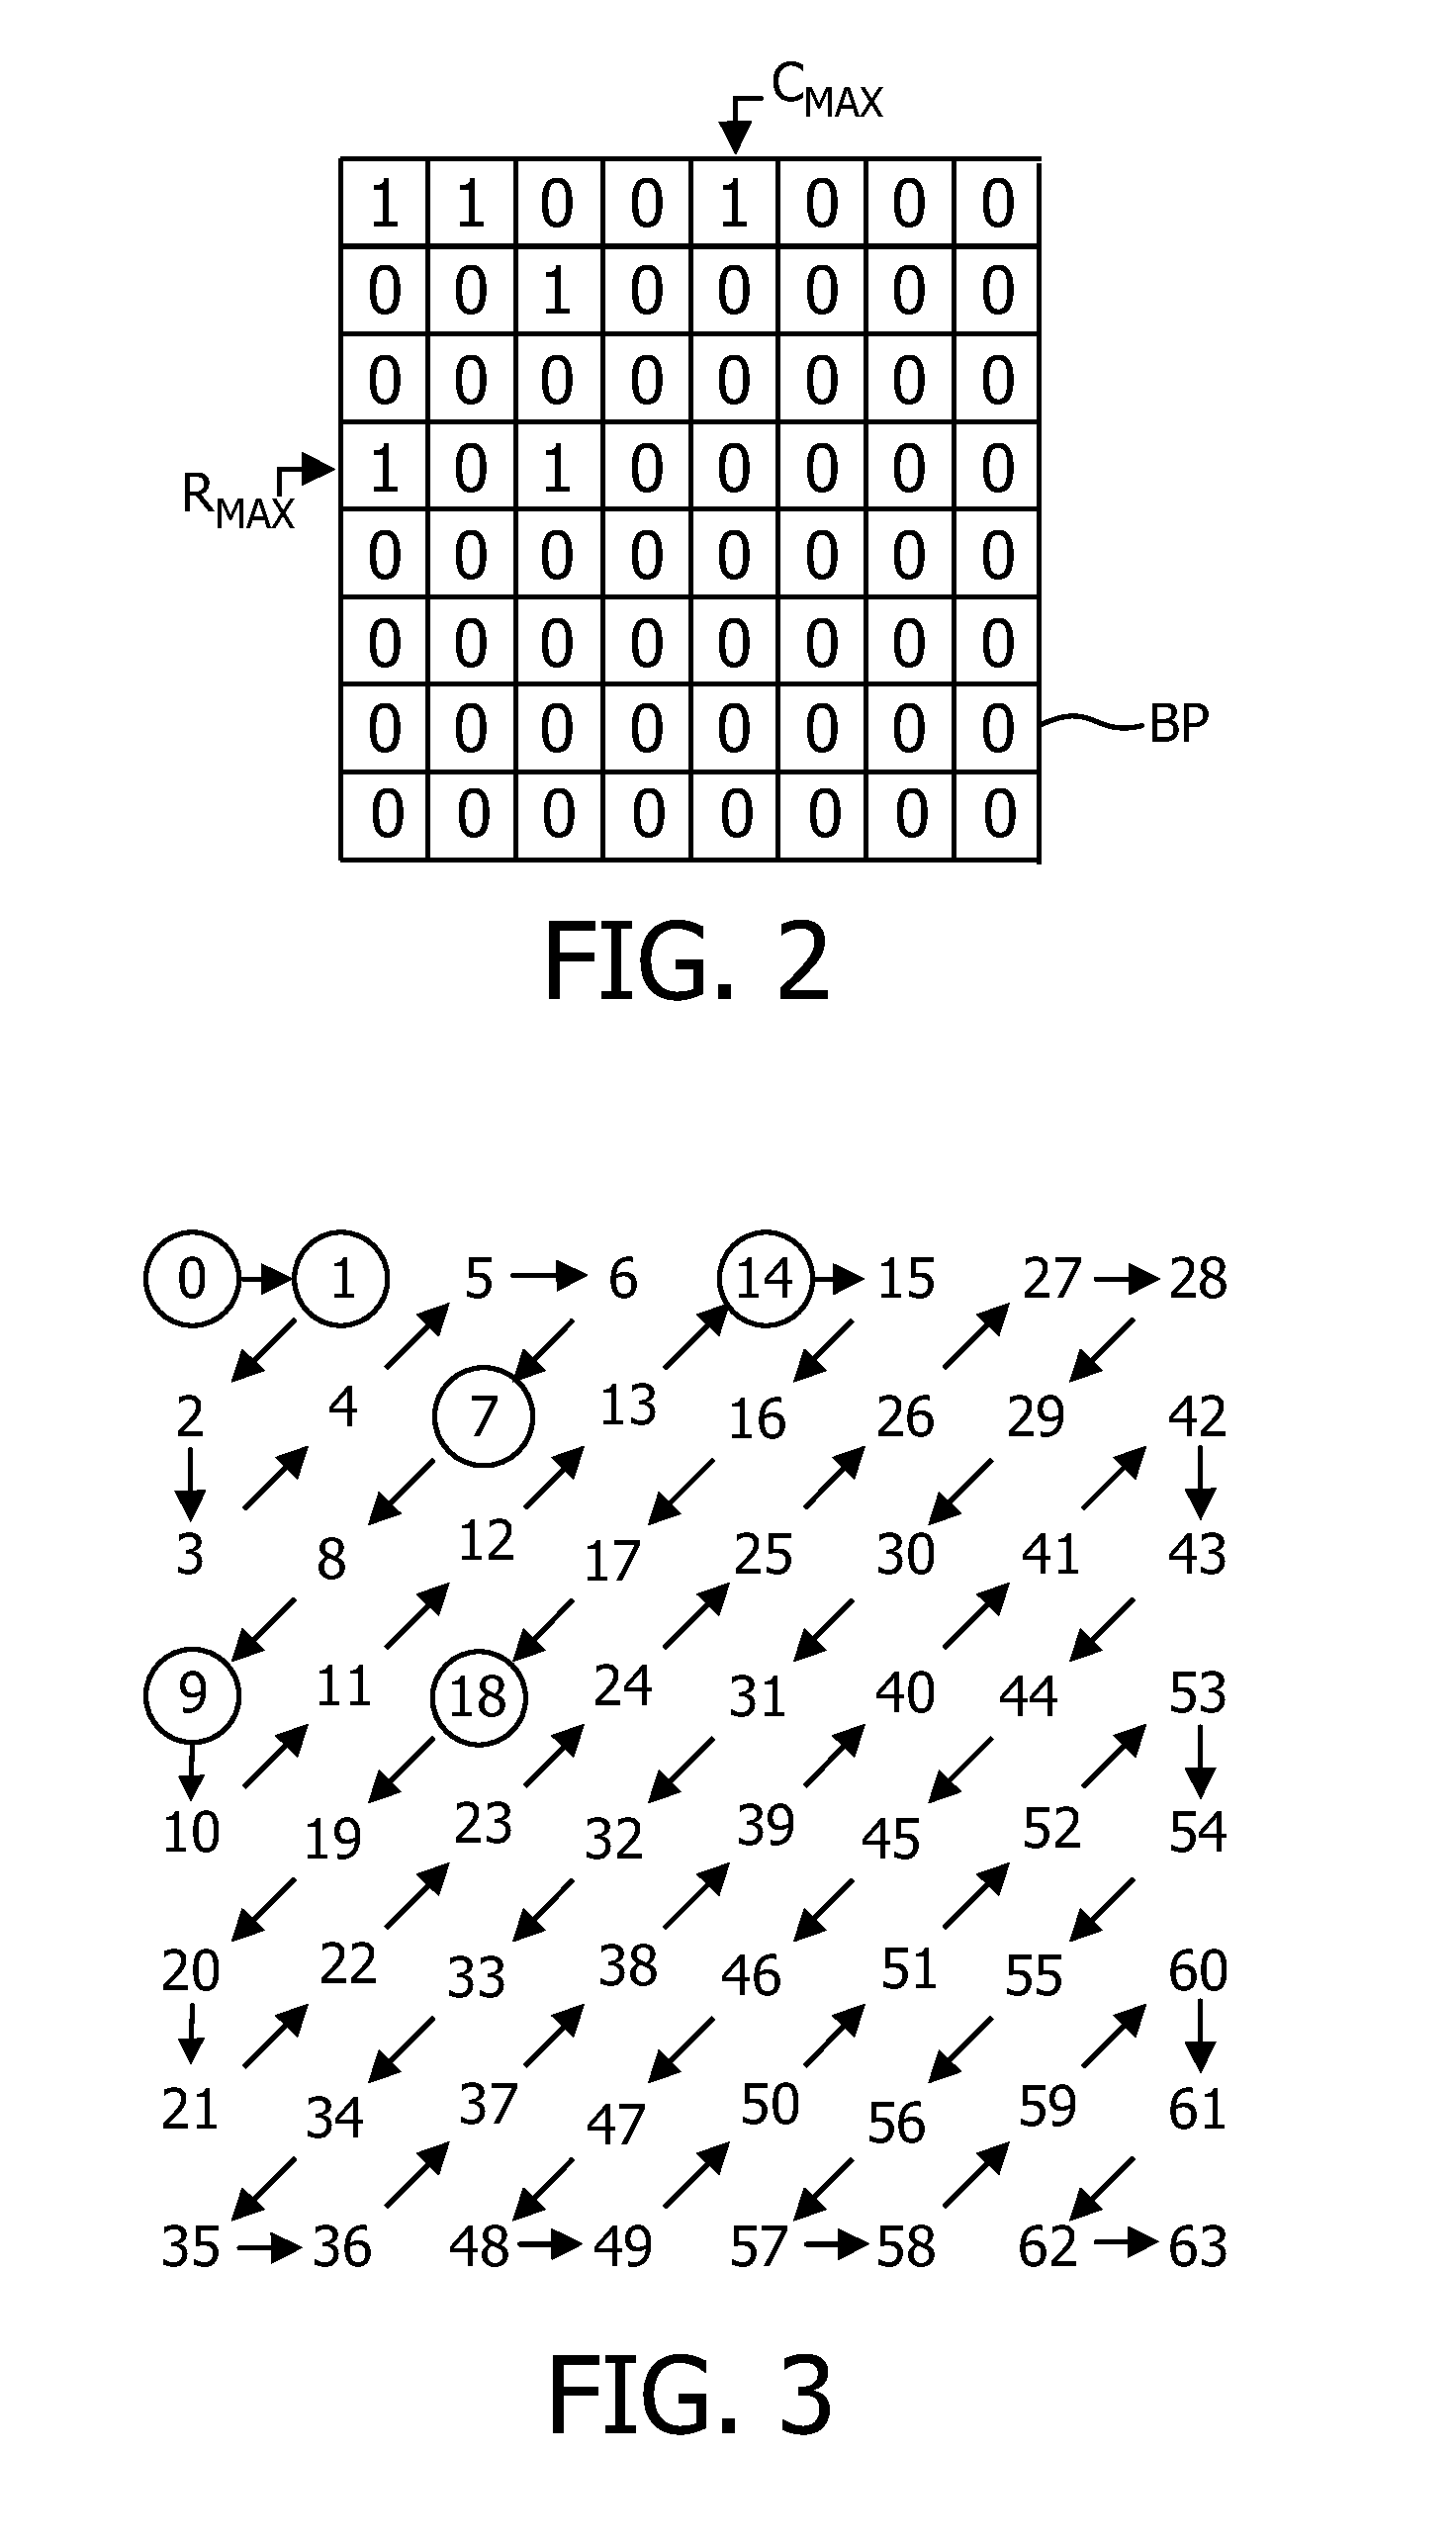 Encoding a signal into a scalable bitstream and decoding such bitstream